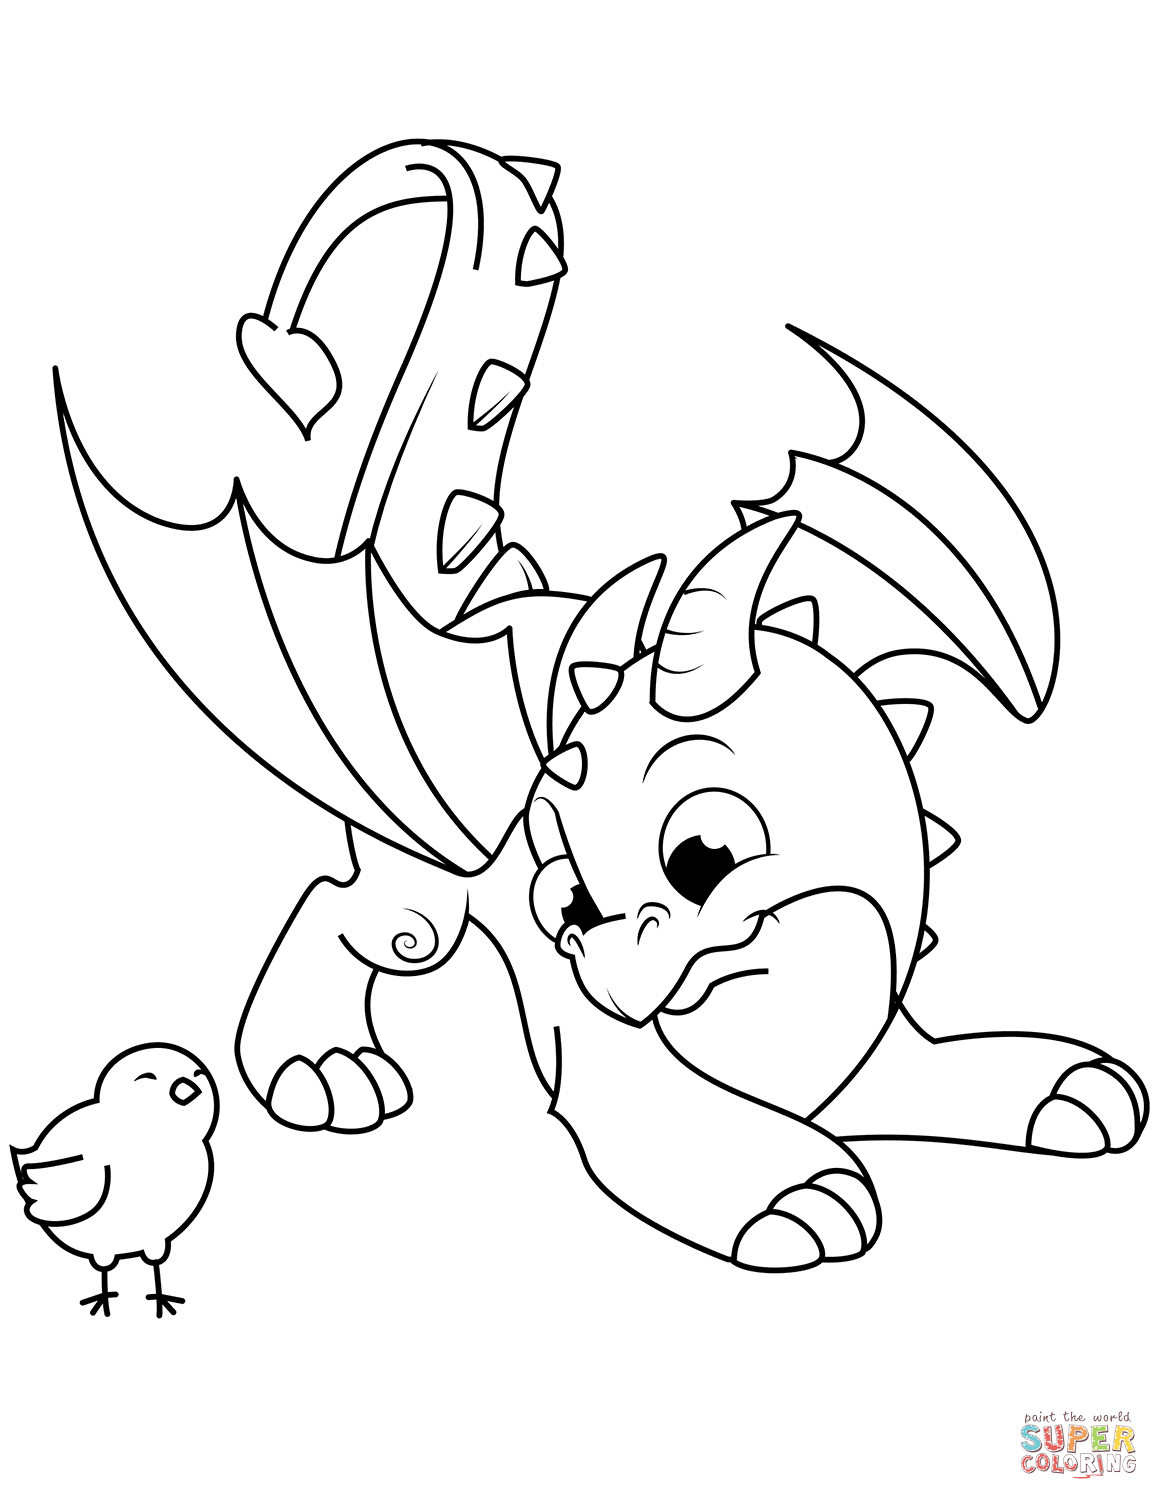 Coloring Pages For Kids Dragons
 Cute Dragon and Chick coloring page